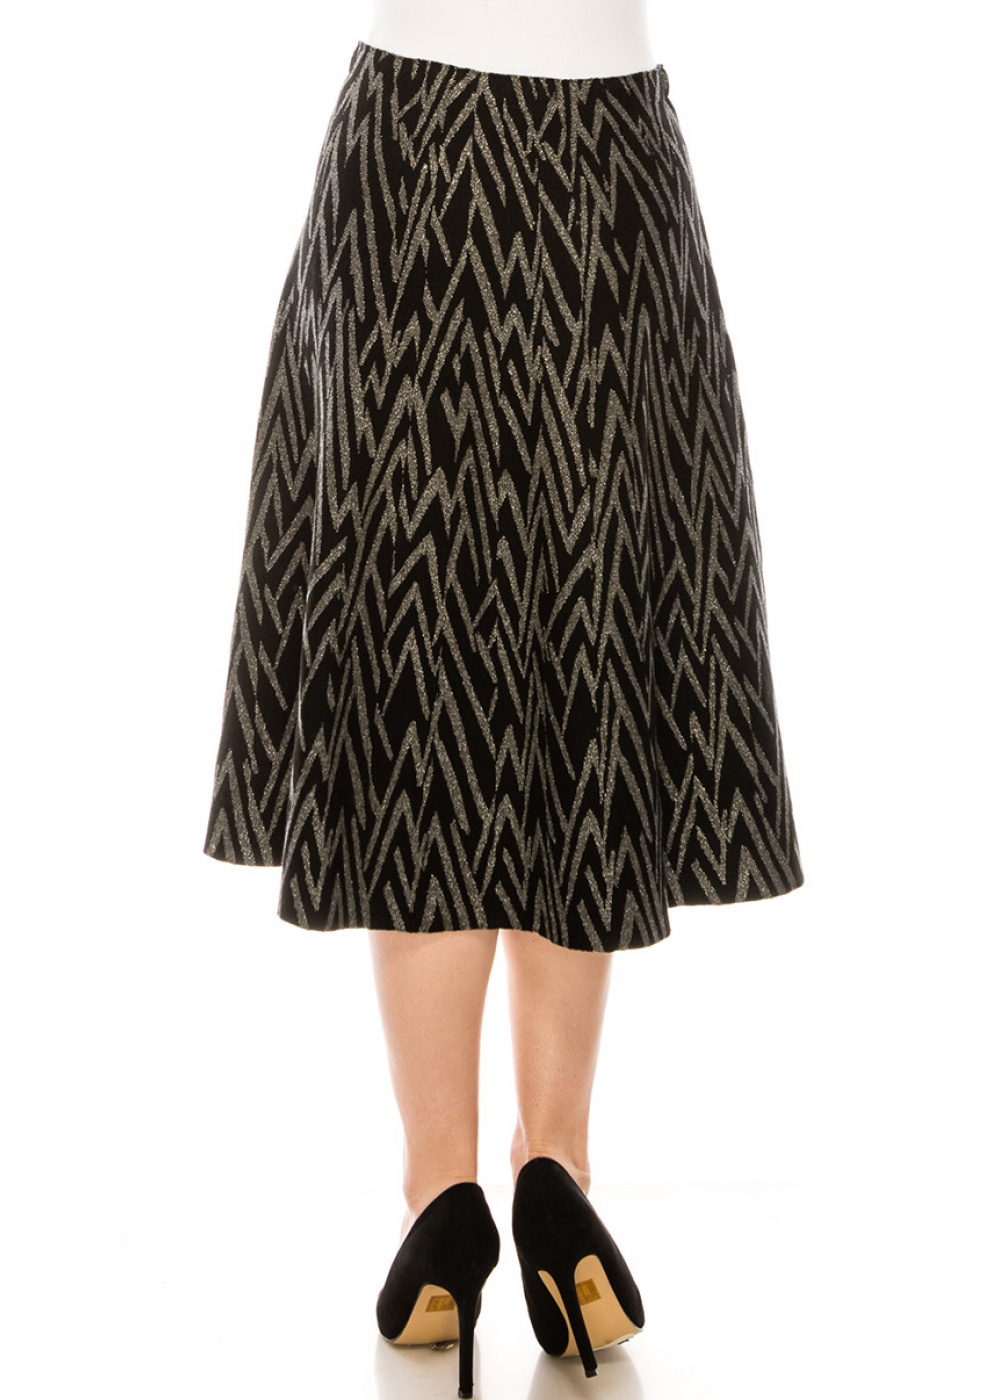 Silver lurex skirt with geometrical pattern